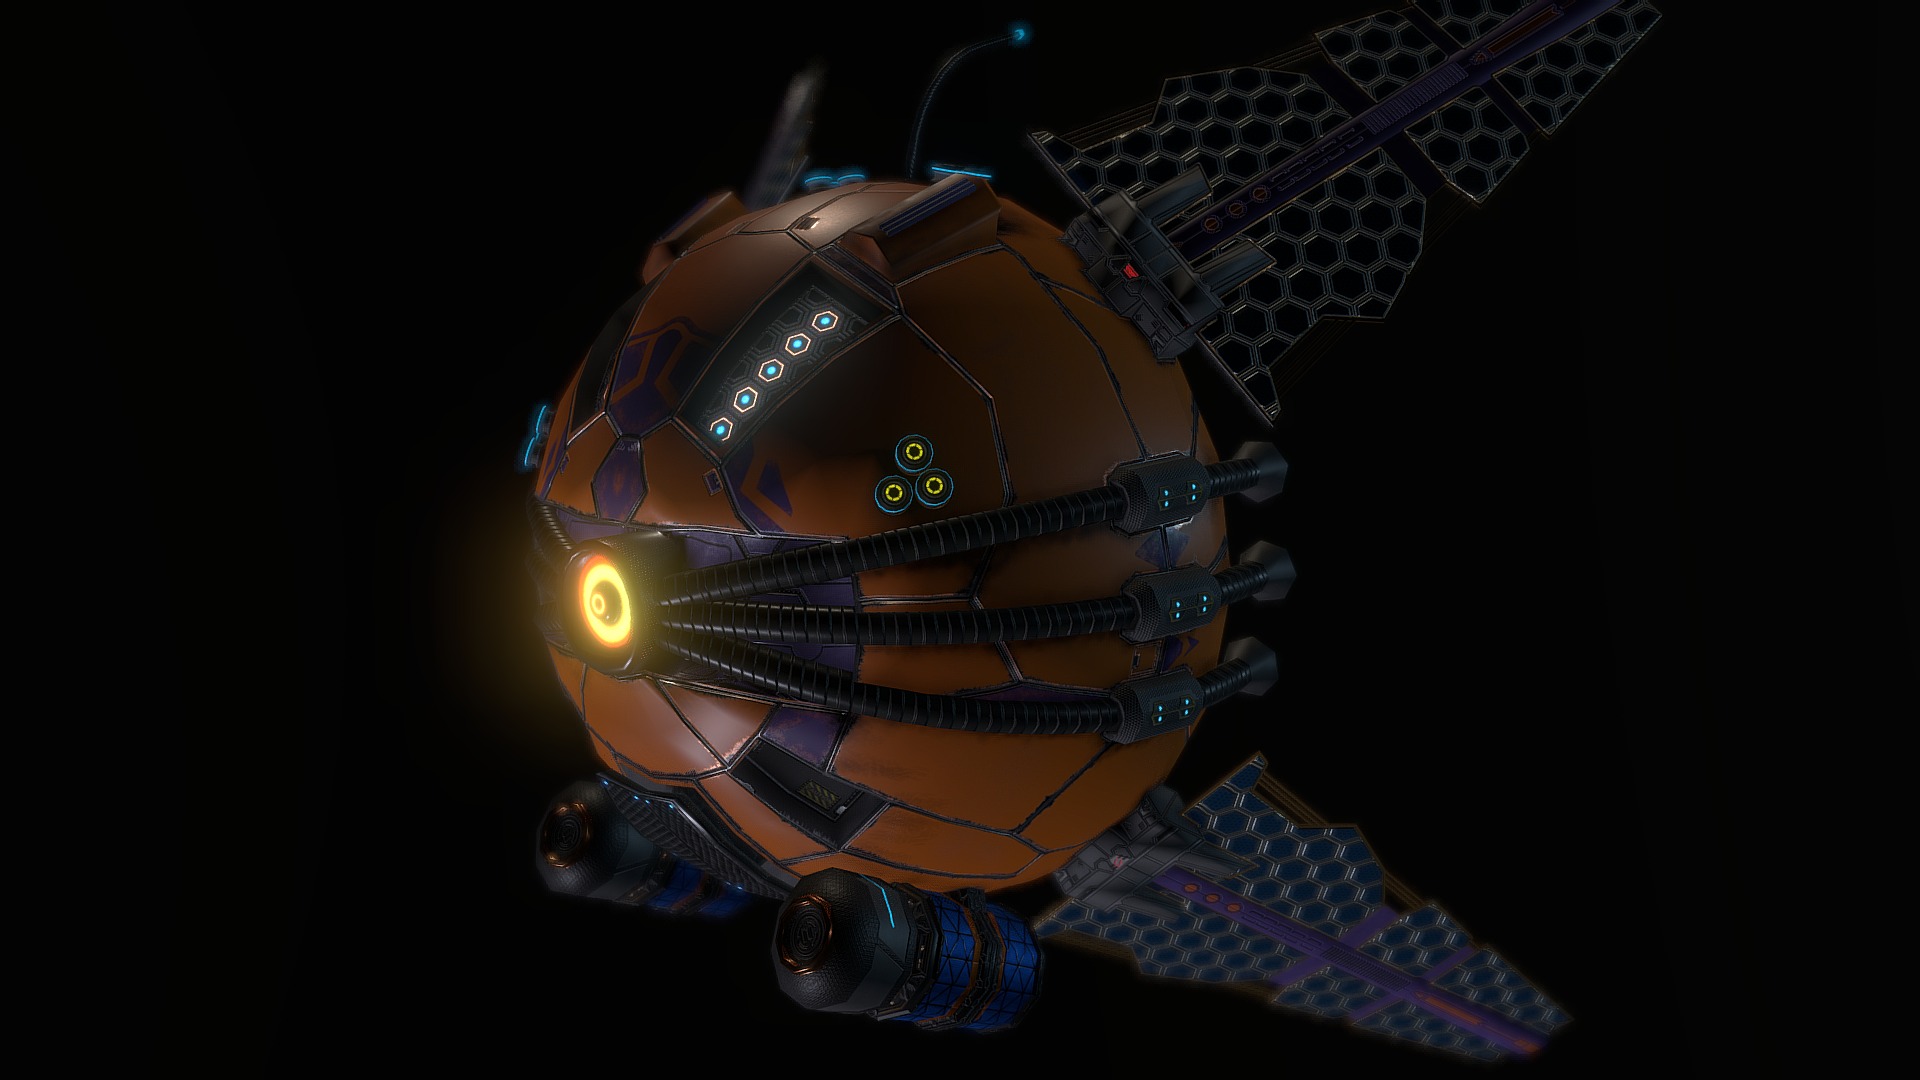 Scif Fi Eye Droid
Working to get better at sci fi models. 
Maya, Substance Painter 3d model